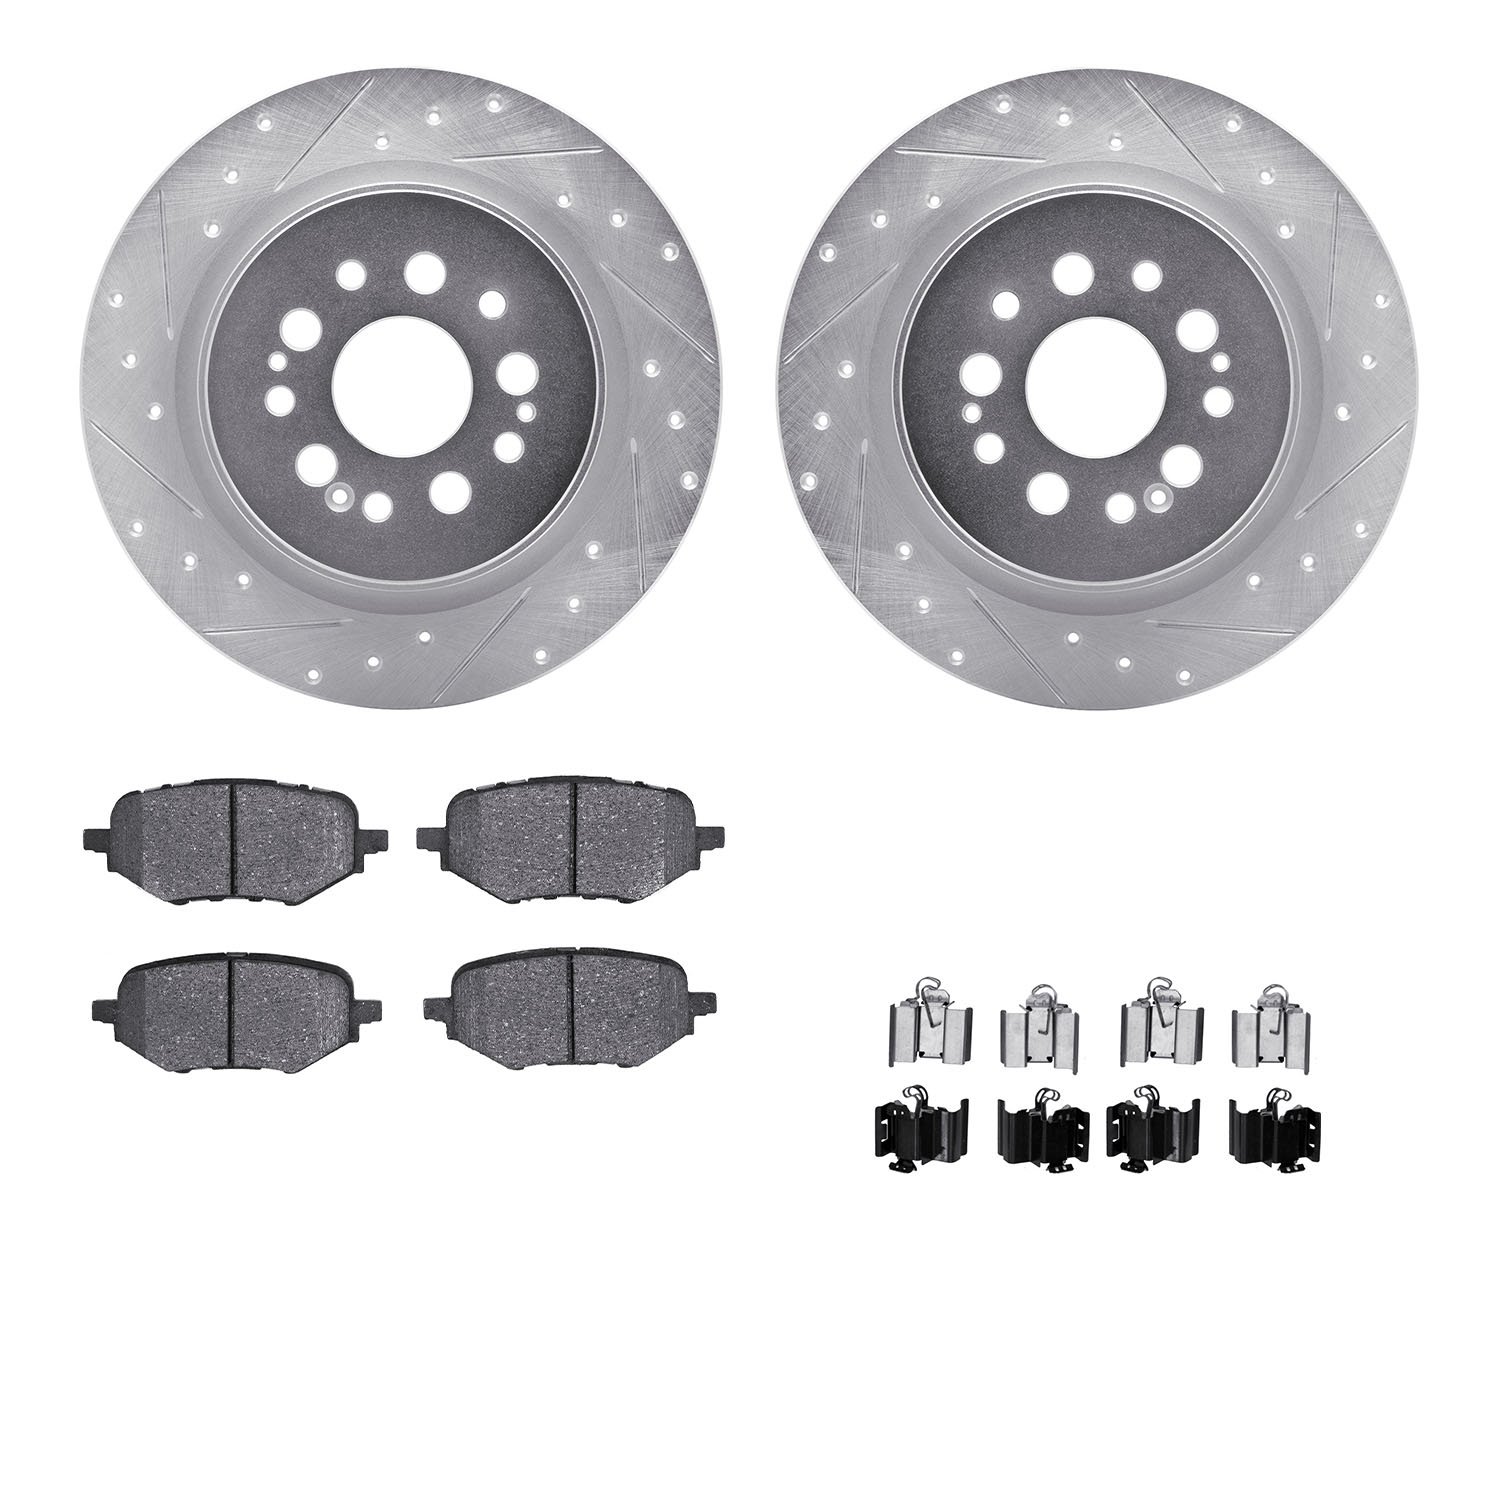 7312-59116 Drilled/Slotted Brake Rotor with 3000-Series Ceramic Brake Pads Kit & Hardware [Silver], Fits Select Acura/Honda, Pos